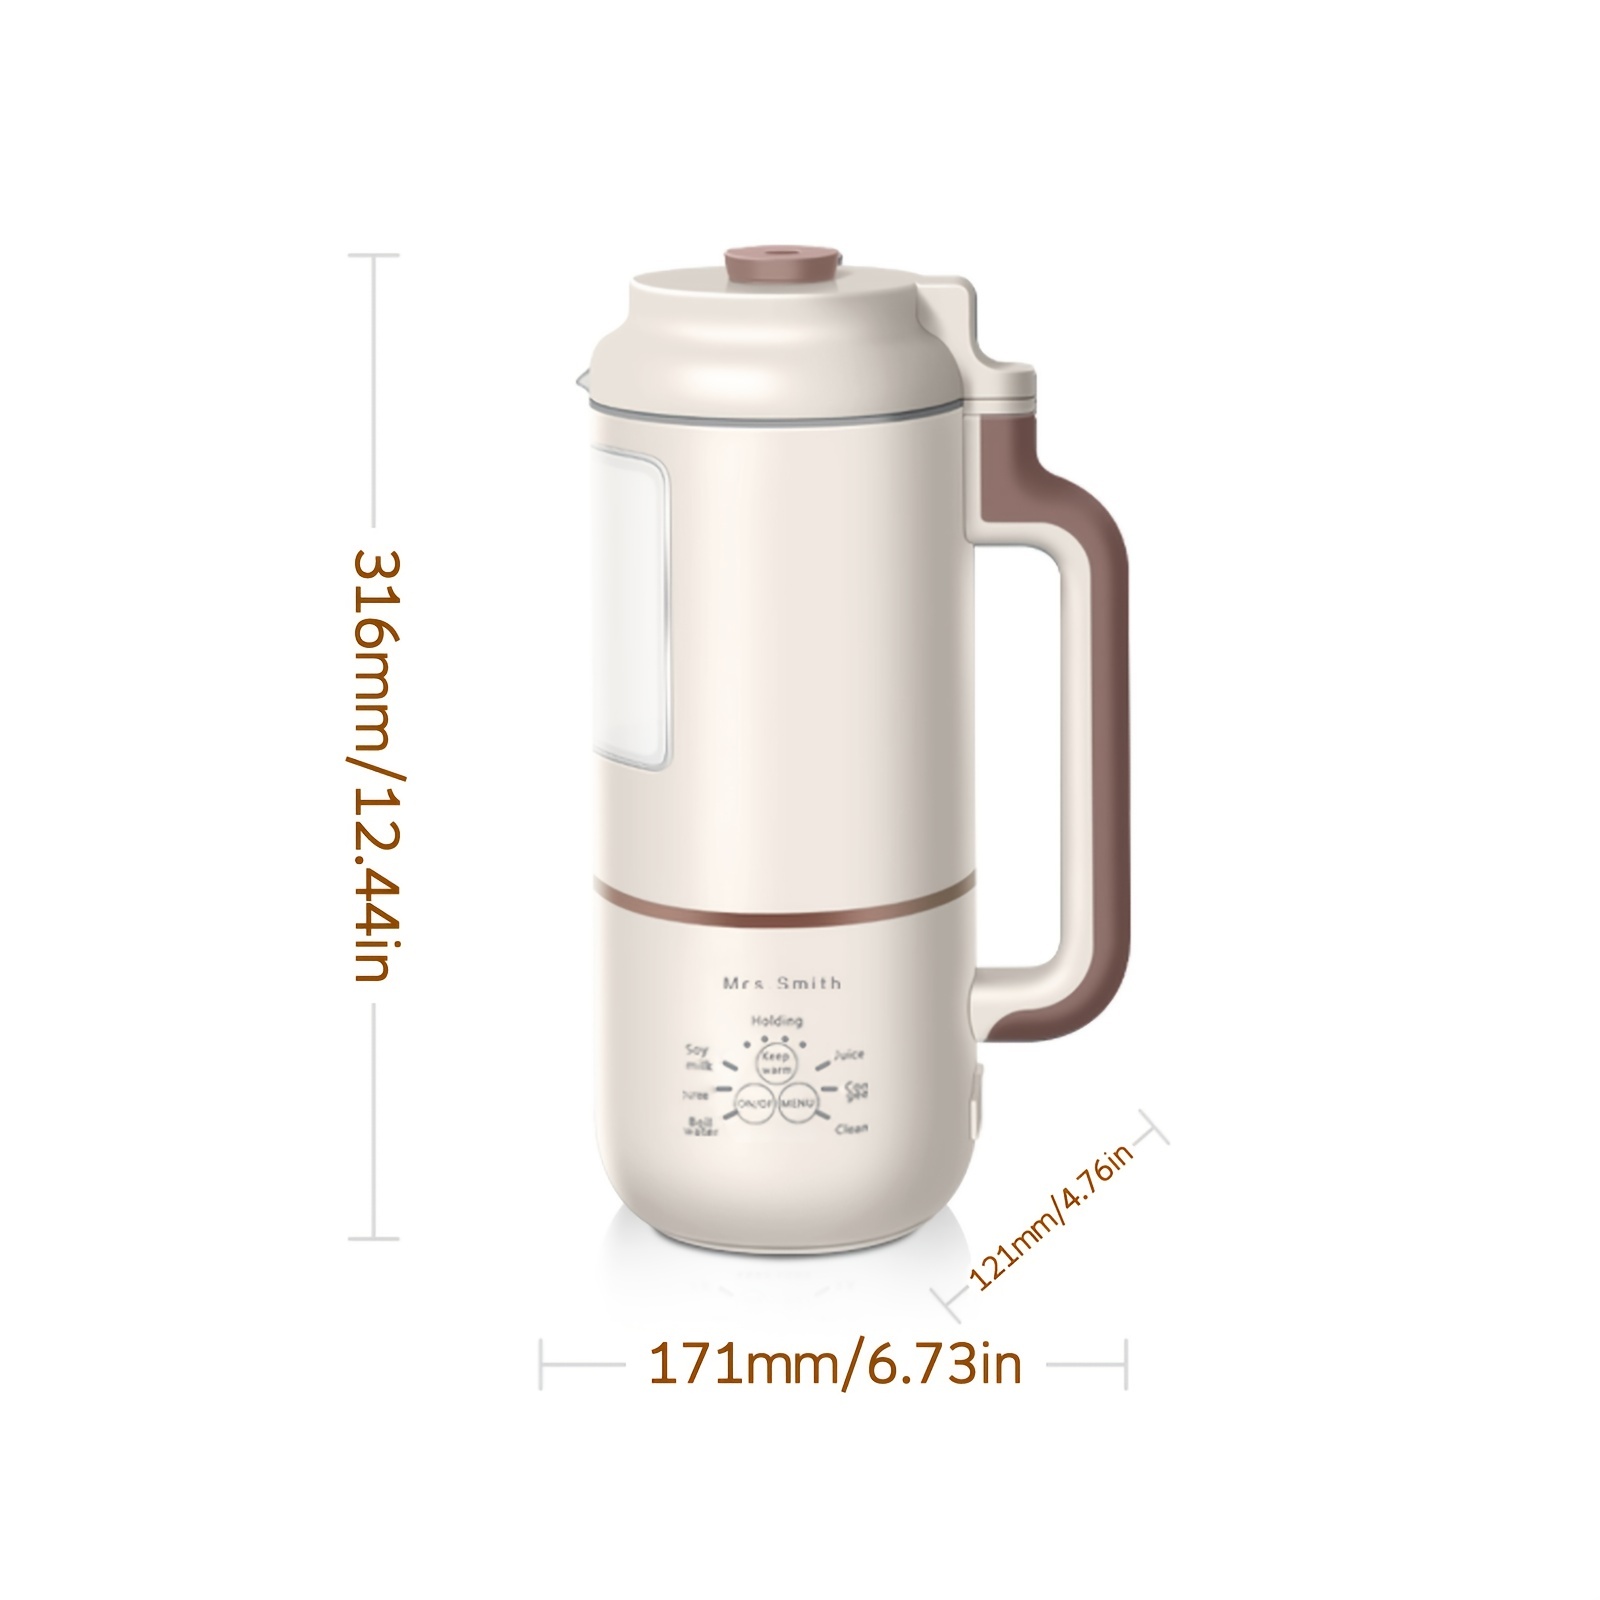 1000ml Mini Soybean Milk Maker | Lowest Price with Free Shipping & Returns